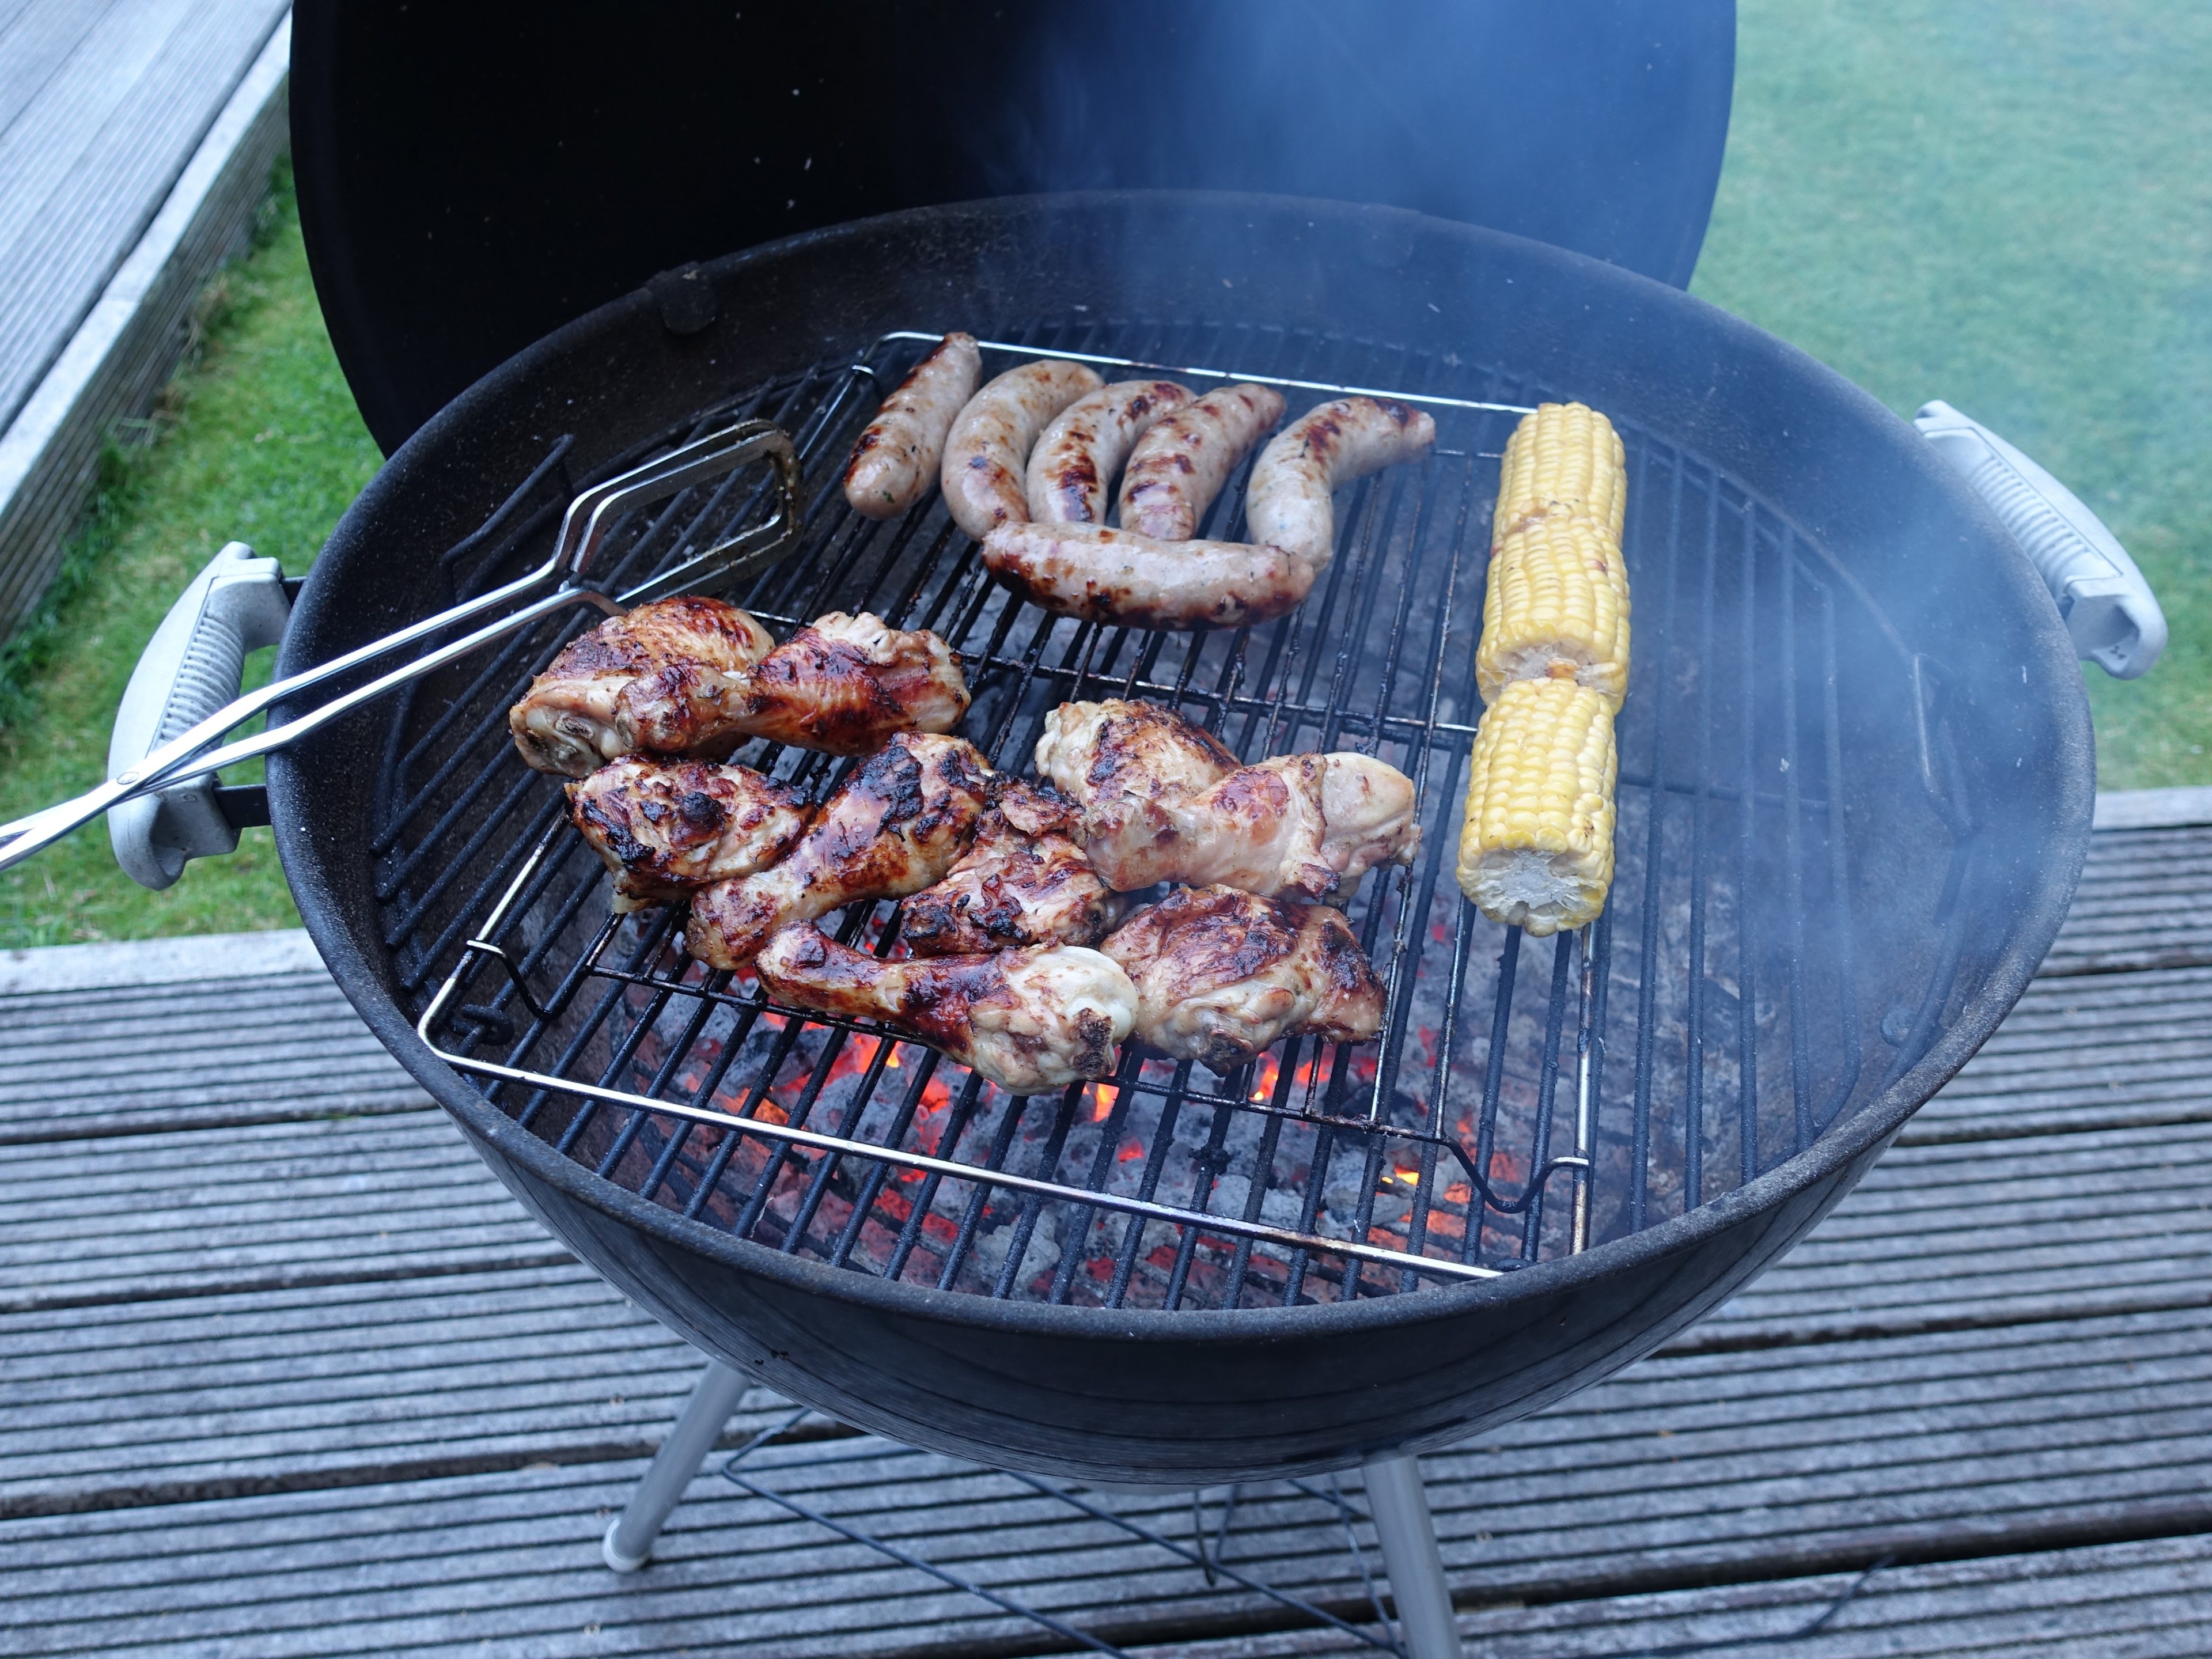 Weber charcoal BBQ - what am I doing wrong? - Page 11 - Food, Drink & Restaurants - PistonHeads